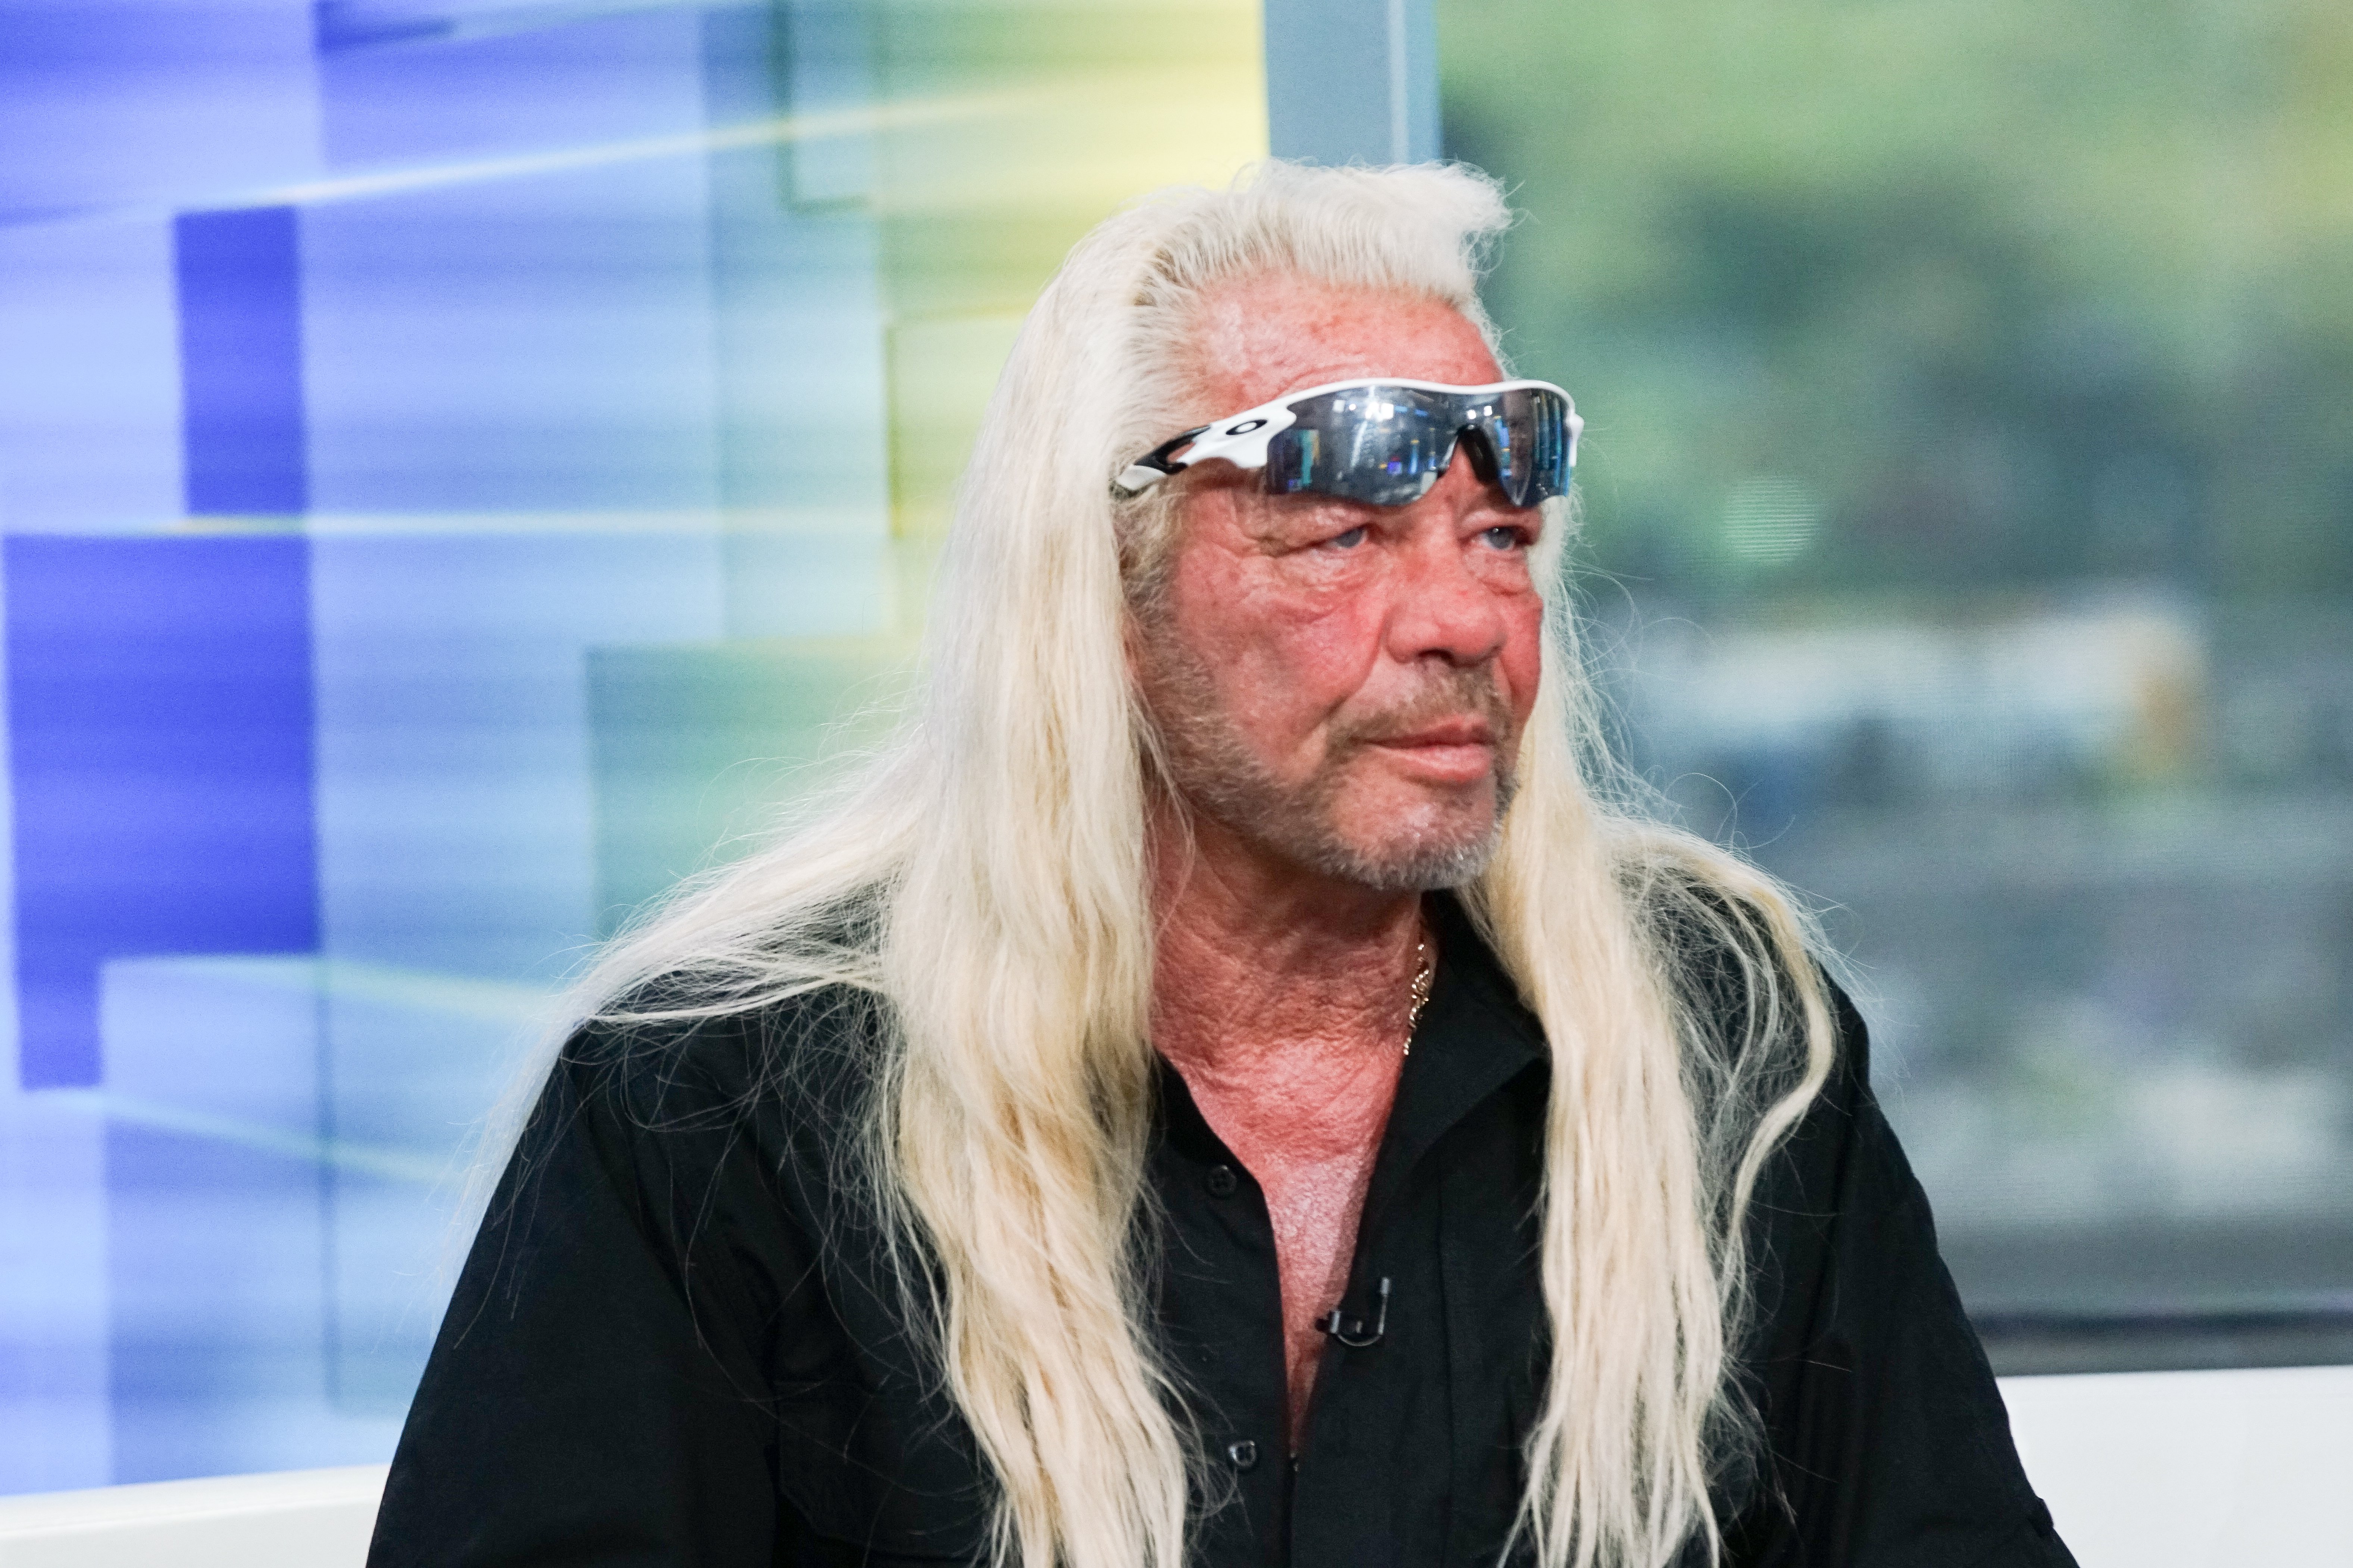 TV personality Duane Chapman aka Dog the Bounty Hunter visits "FOX & Friends" at FOX Studios on August 28, 2019 in New York City | Photo: Getty Images